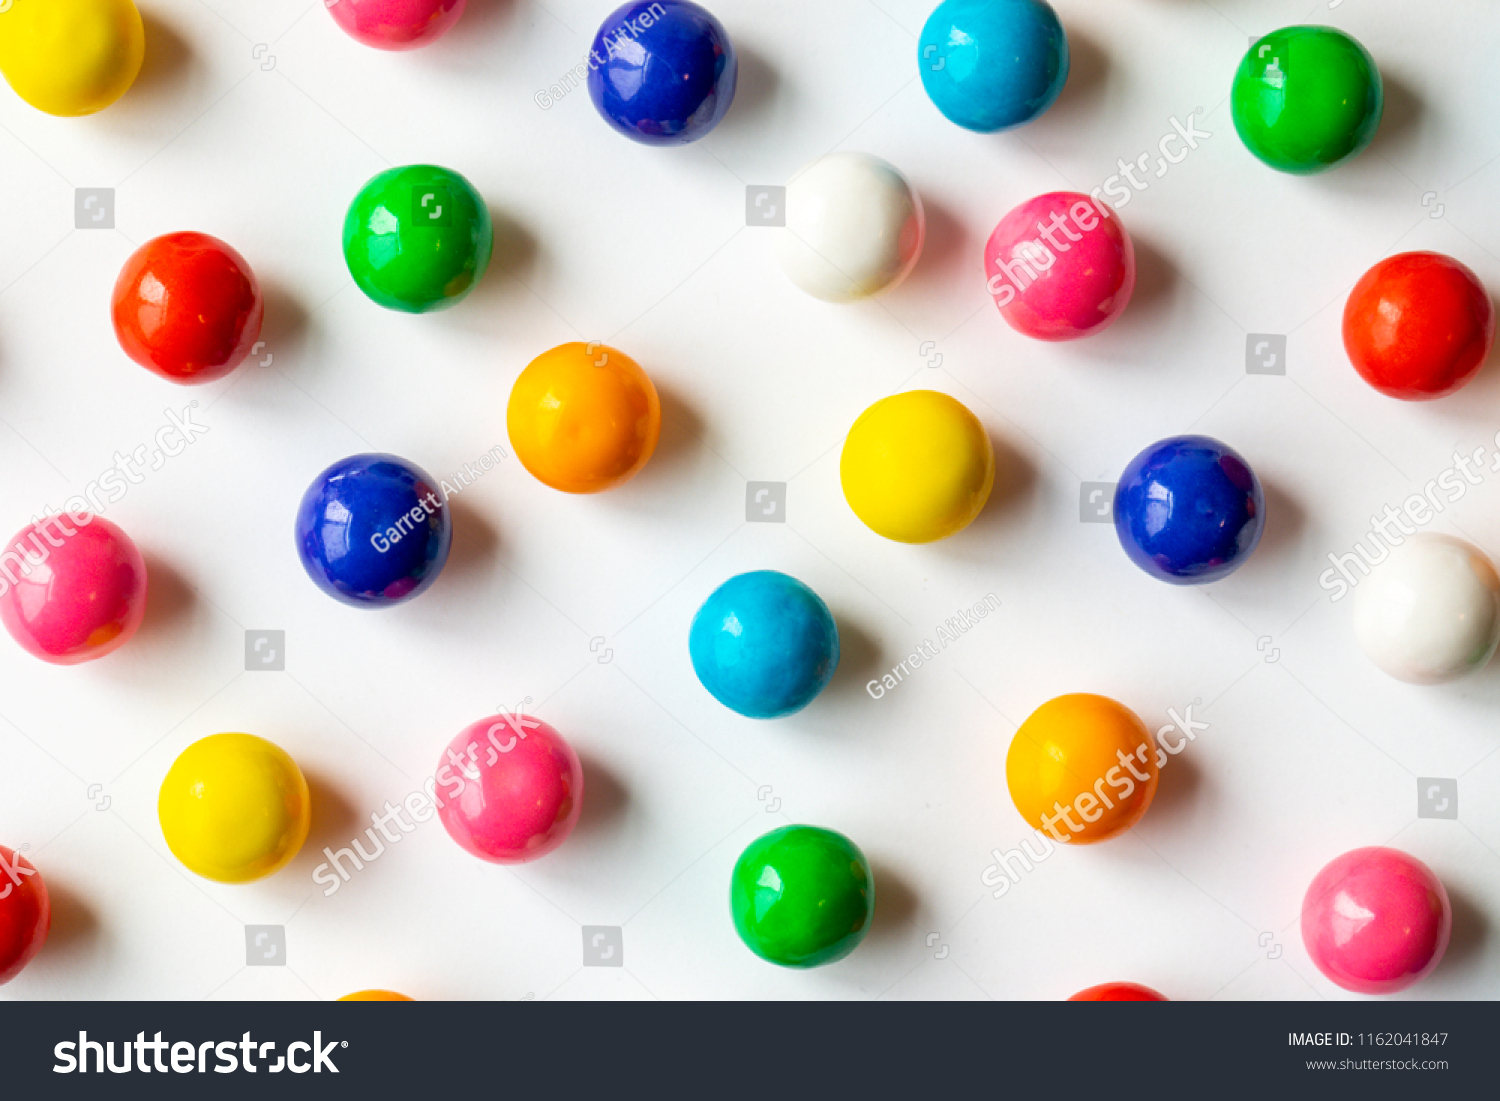 A variety of gumballs with different colors shot on a white background #1162041847